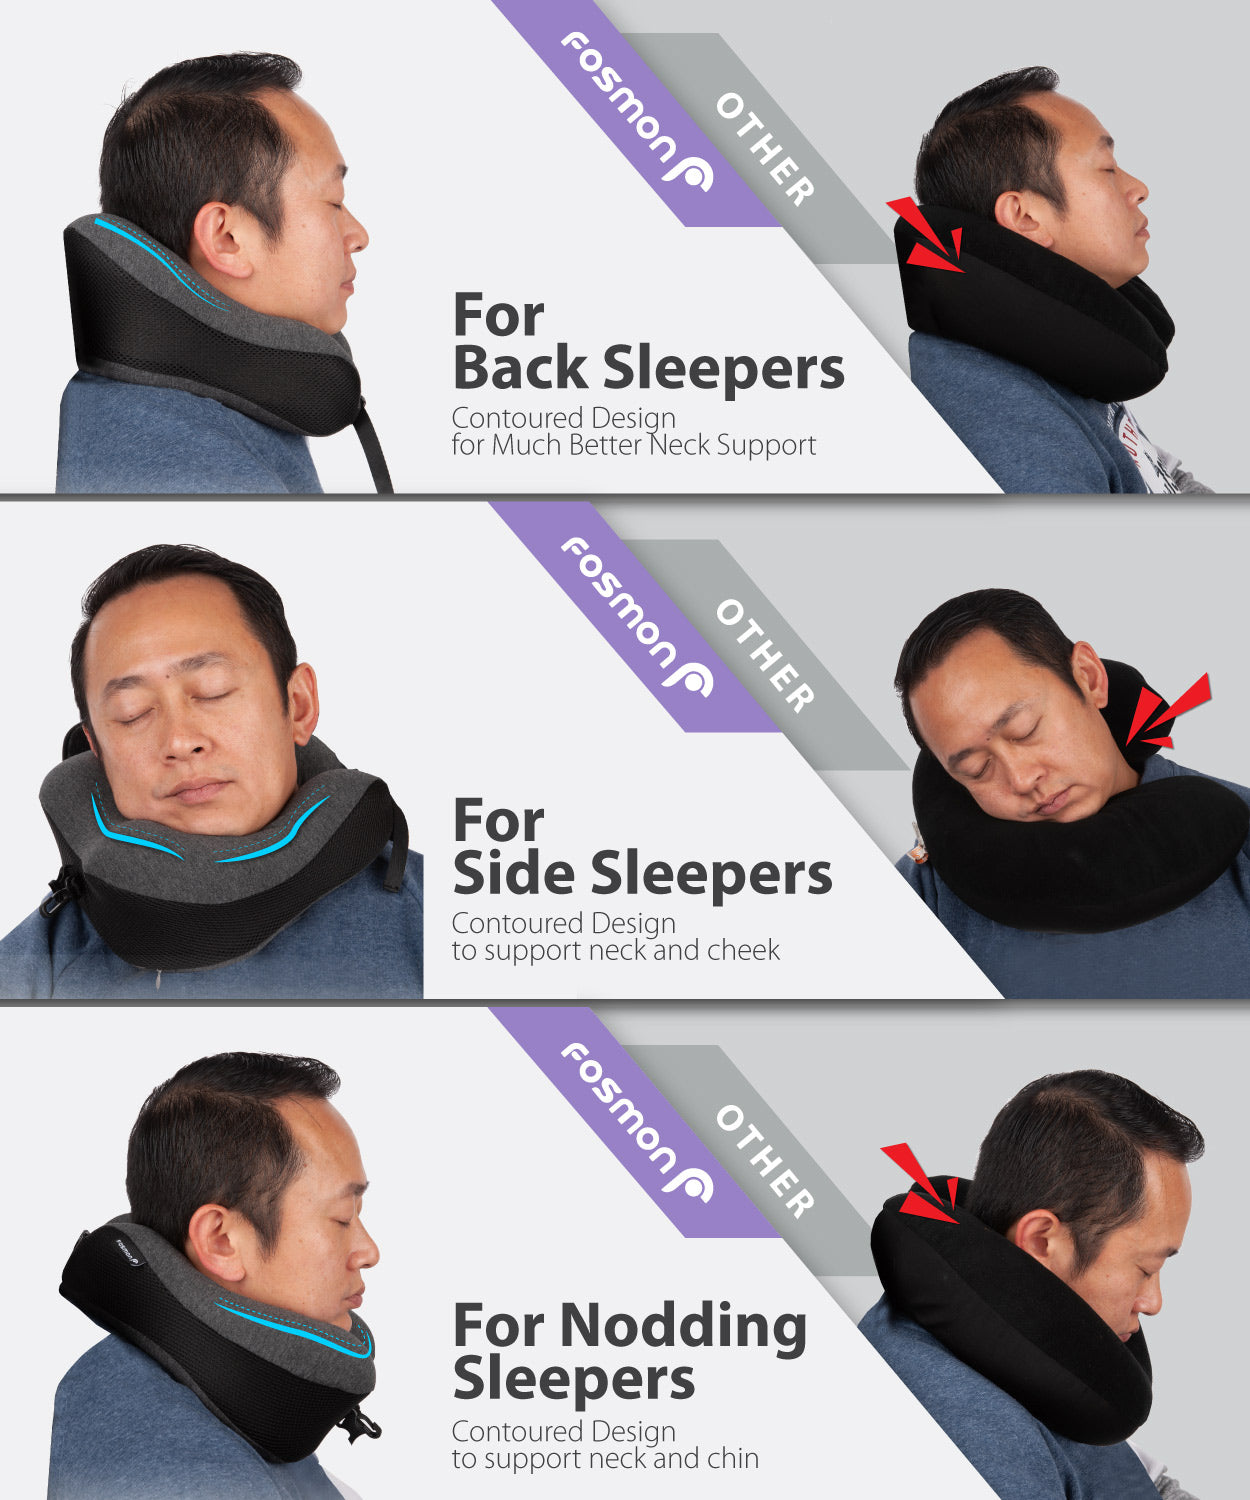 Fosmon Travel Neck Pillow With Storage Bag Kit, Soft Comfortable Memory Foam Neck Cushion, Head & Chin Support U-Shape Pillow, Machine Washable Cotton Cover for Traveling Airplane Flight, Car, Bus